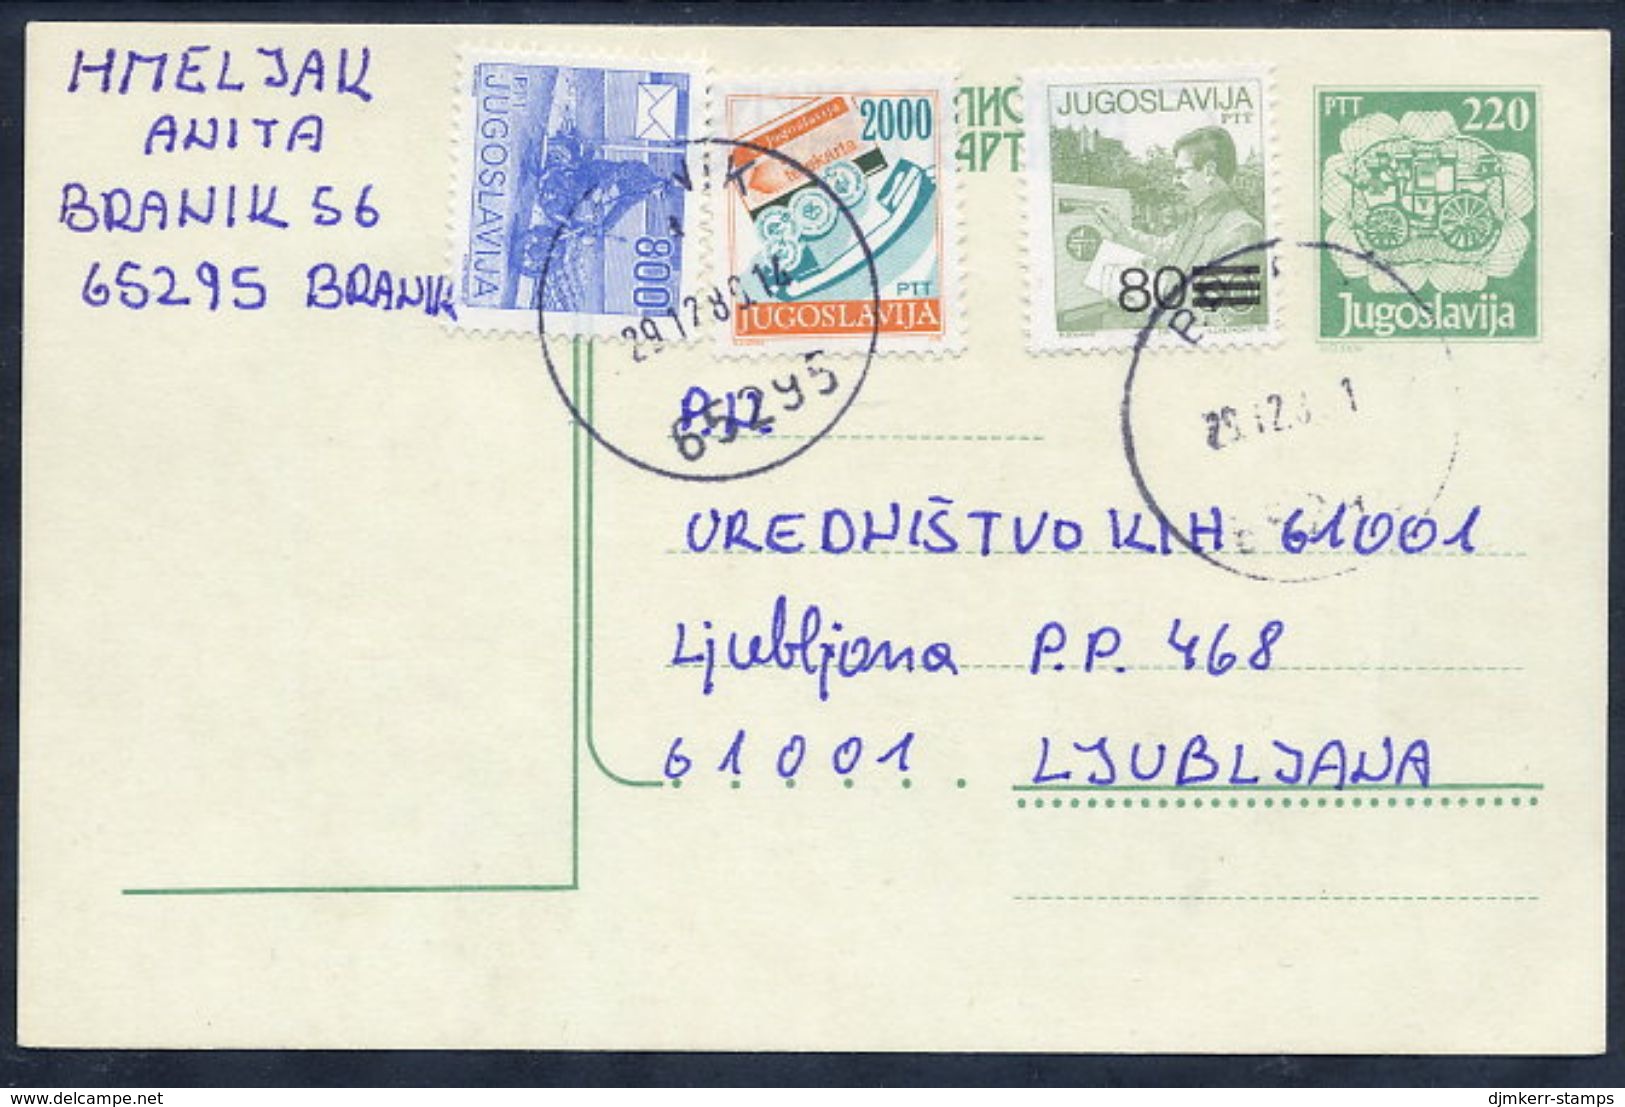 YUGOSLAVIA 1989 Mailcoach 220 D. Stationery Card Used With Additional Franking.  Michel P199 - Postal Stationery